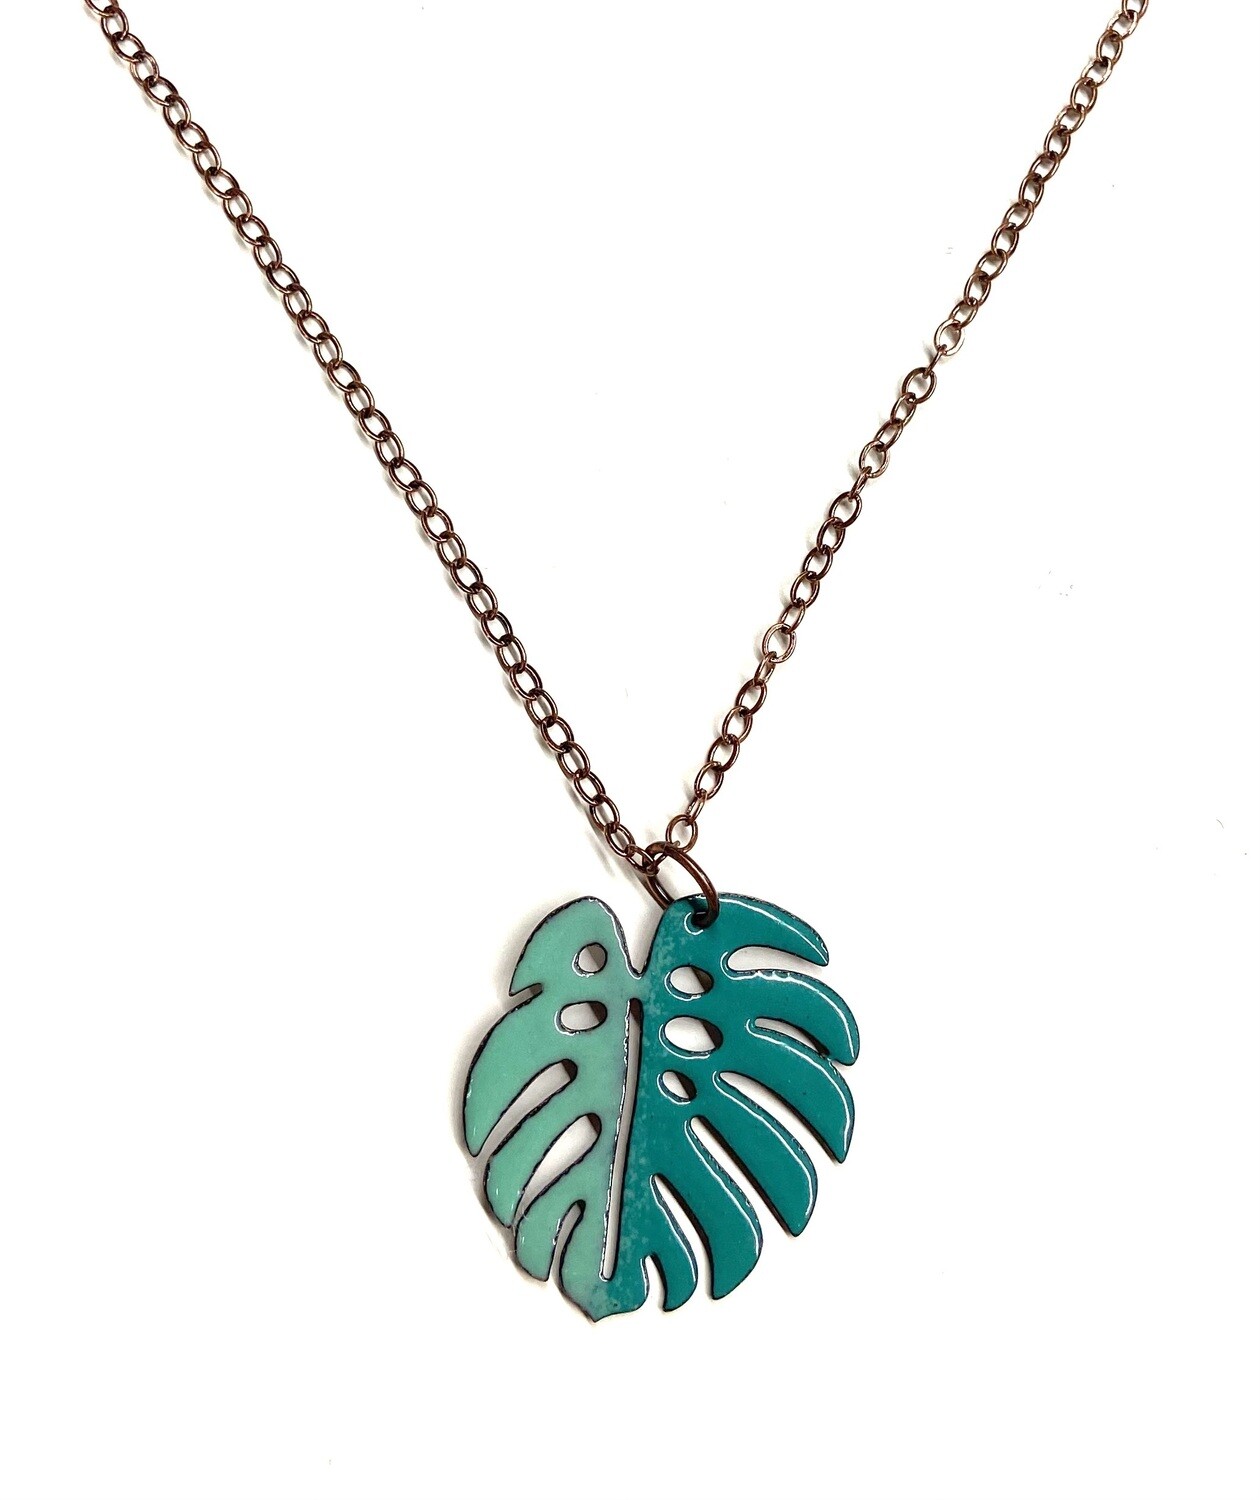 Aqua and Teal Monstera Necklace- Aflame 